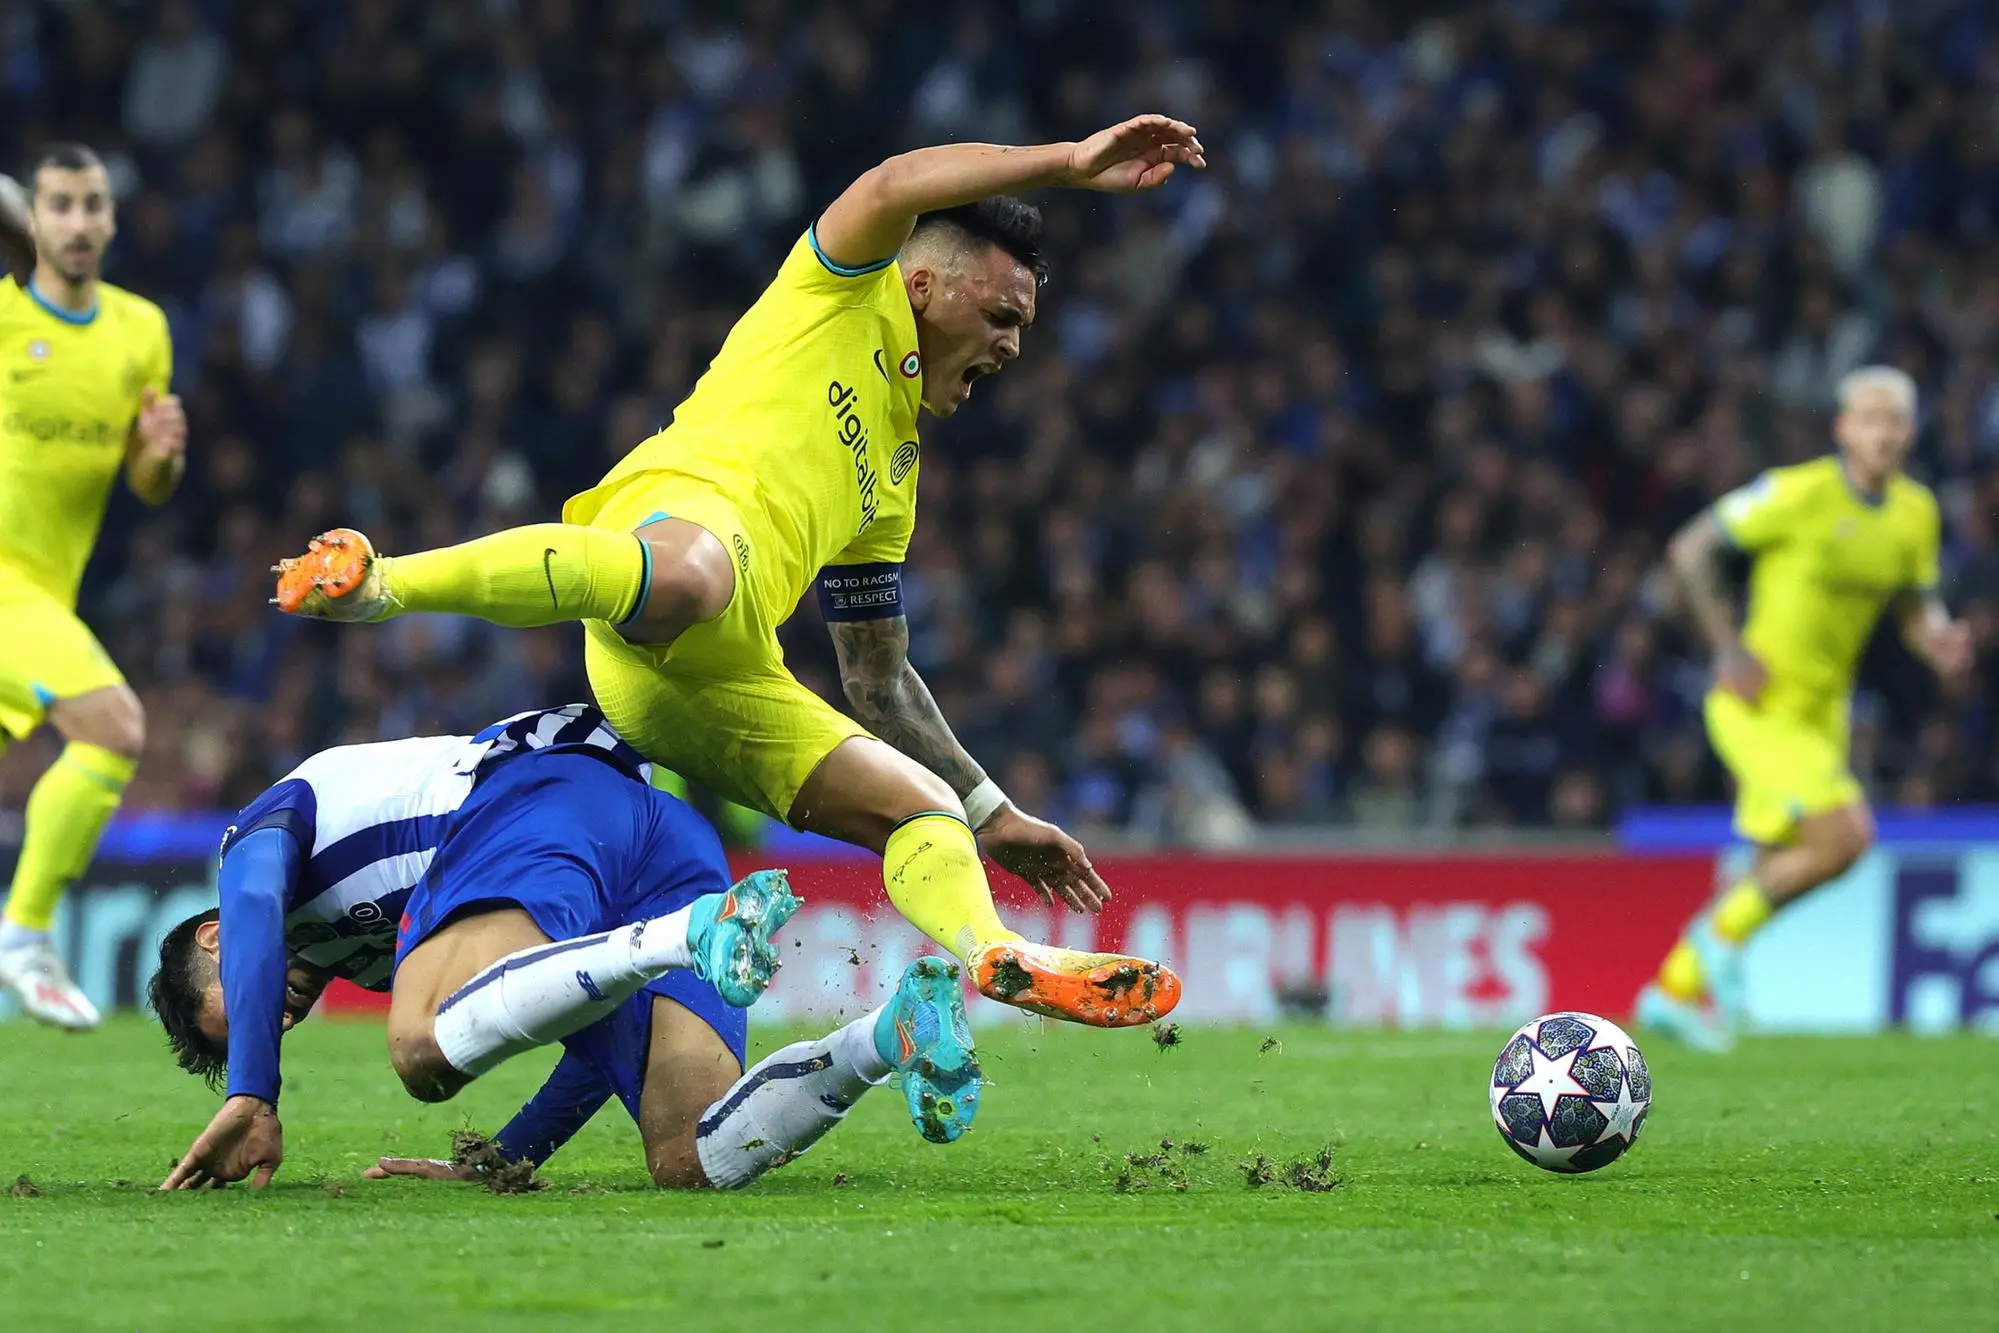 Lautaro Martinez in action at the Dragão (Ansa)